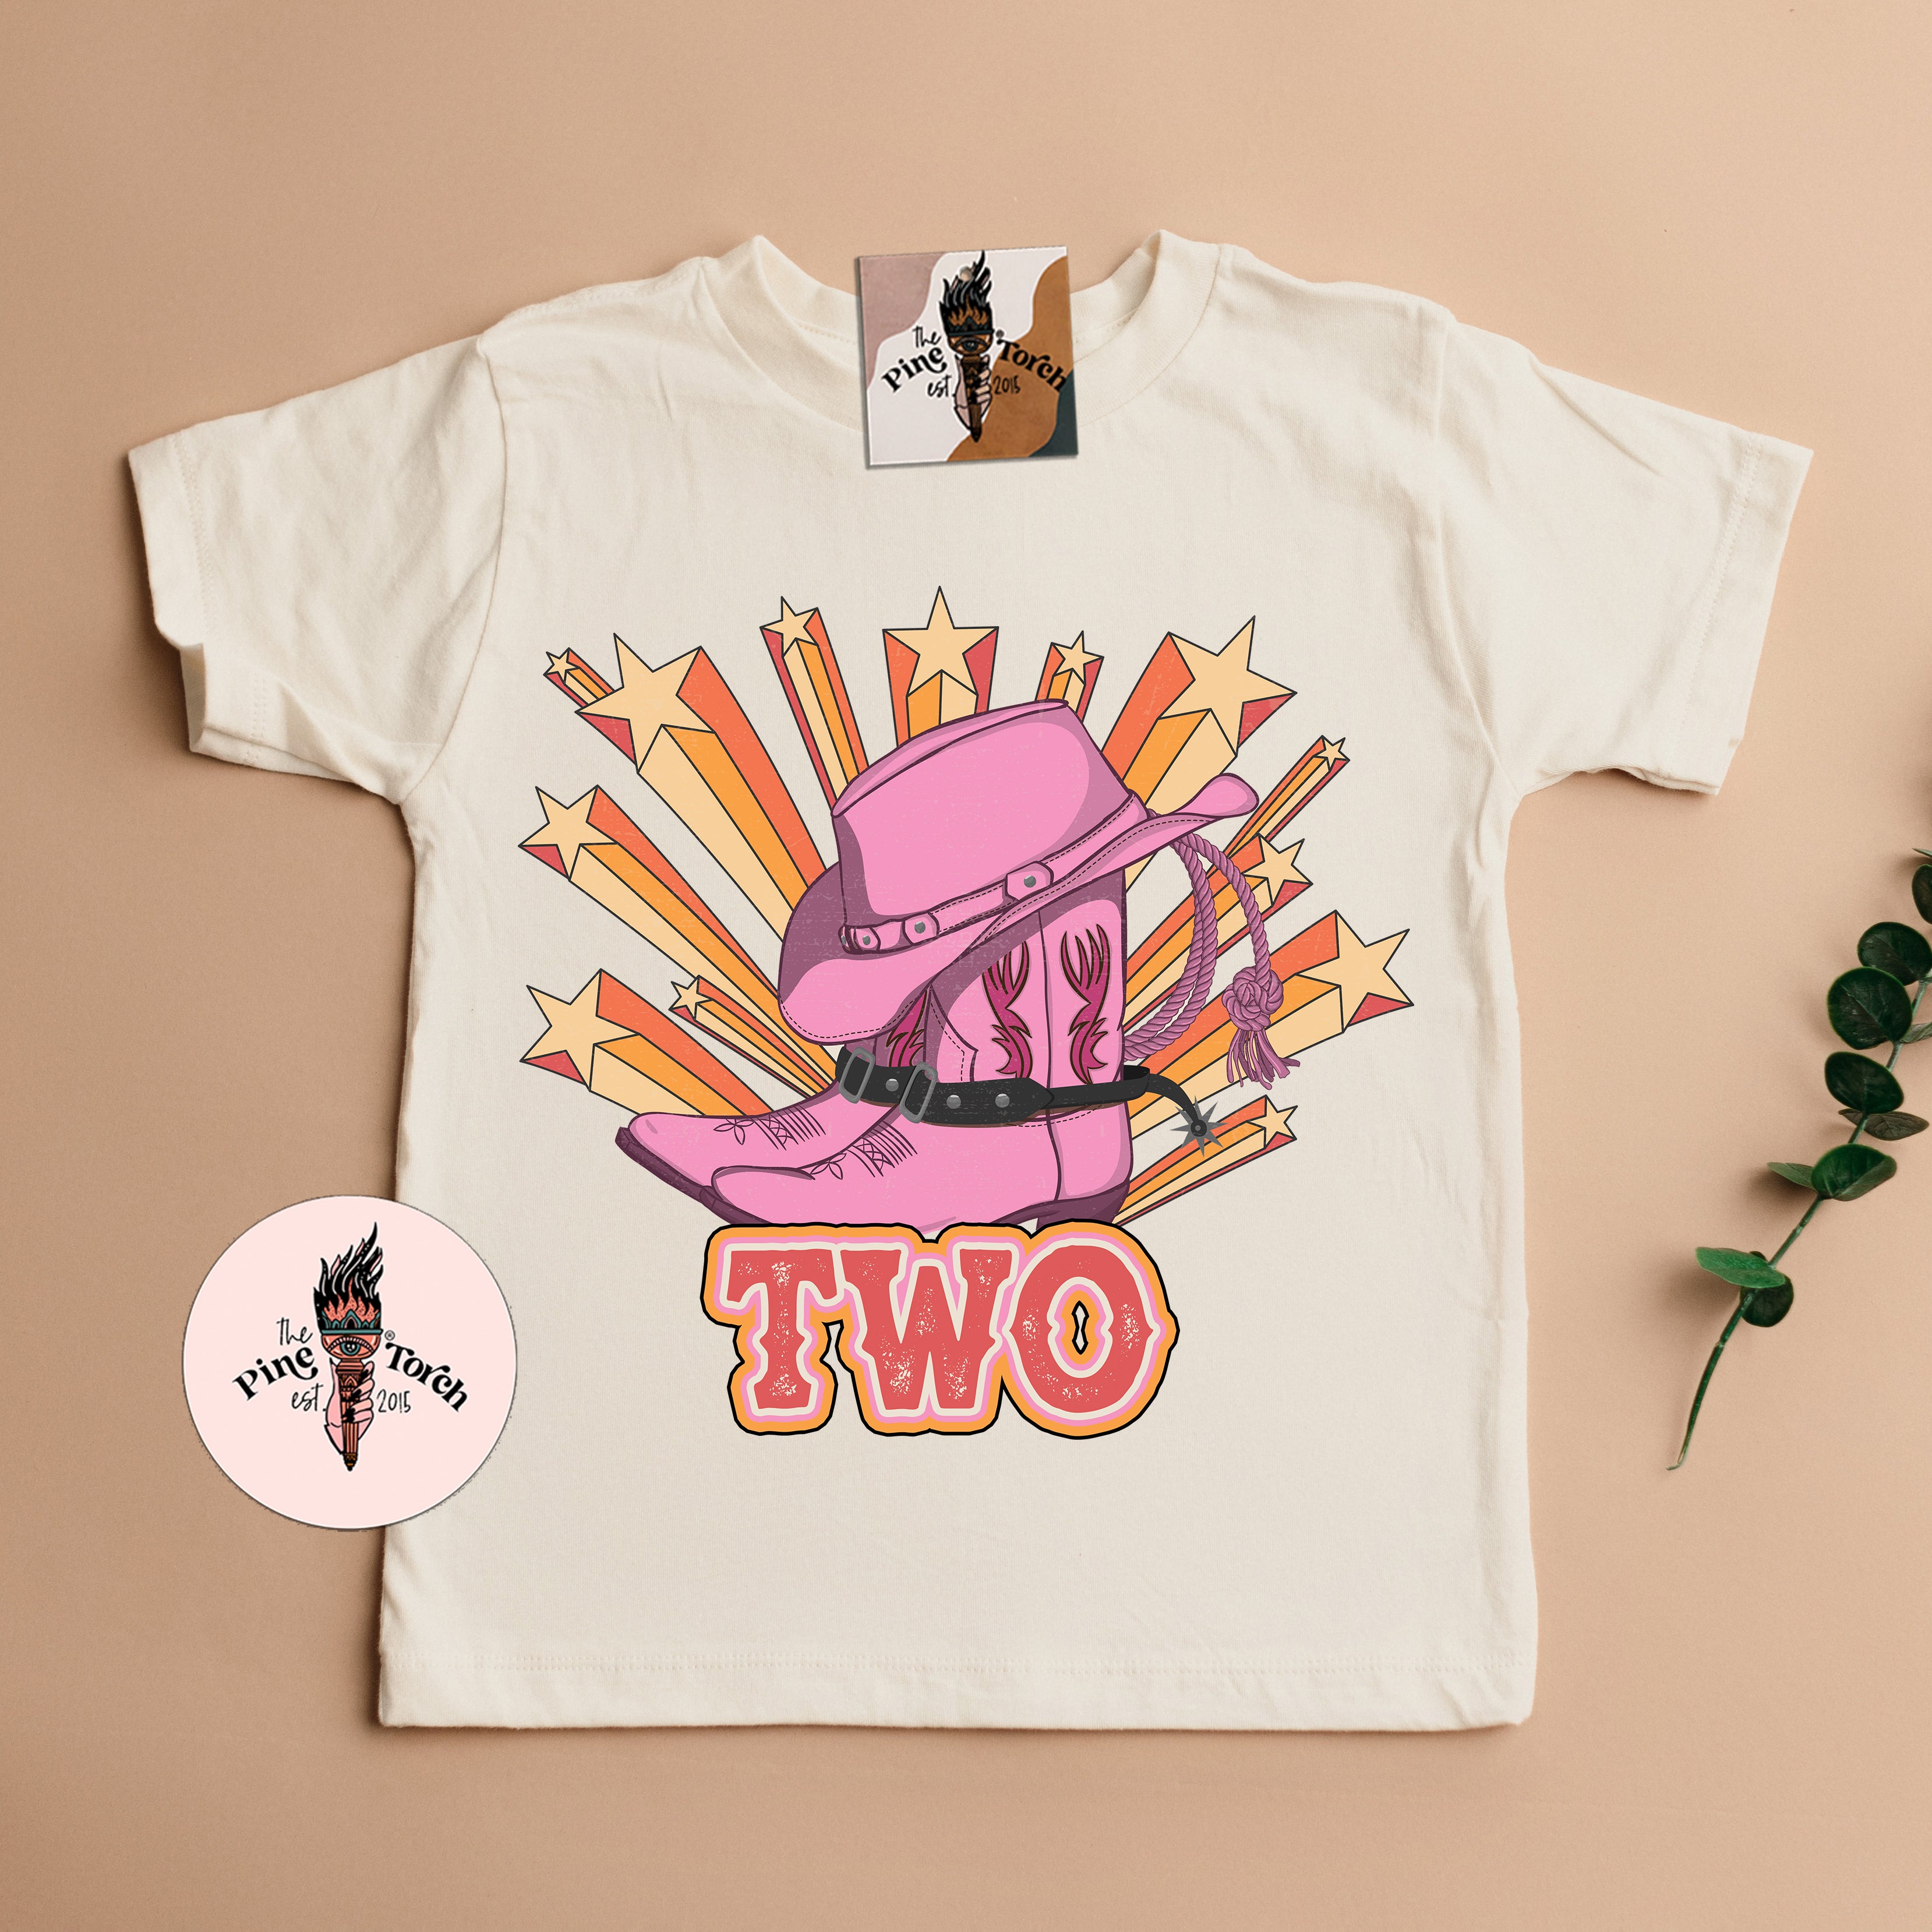 « COWGIRL SECOND BIRTHDAY » KID'S TEE